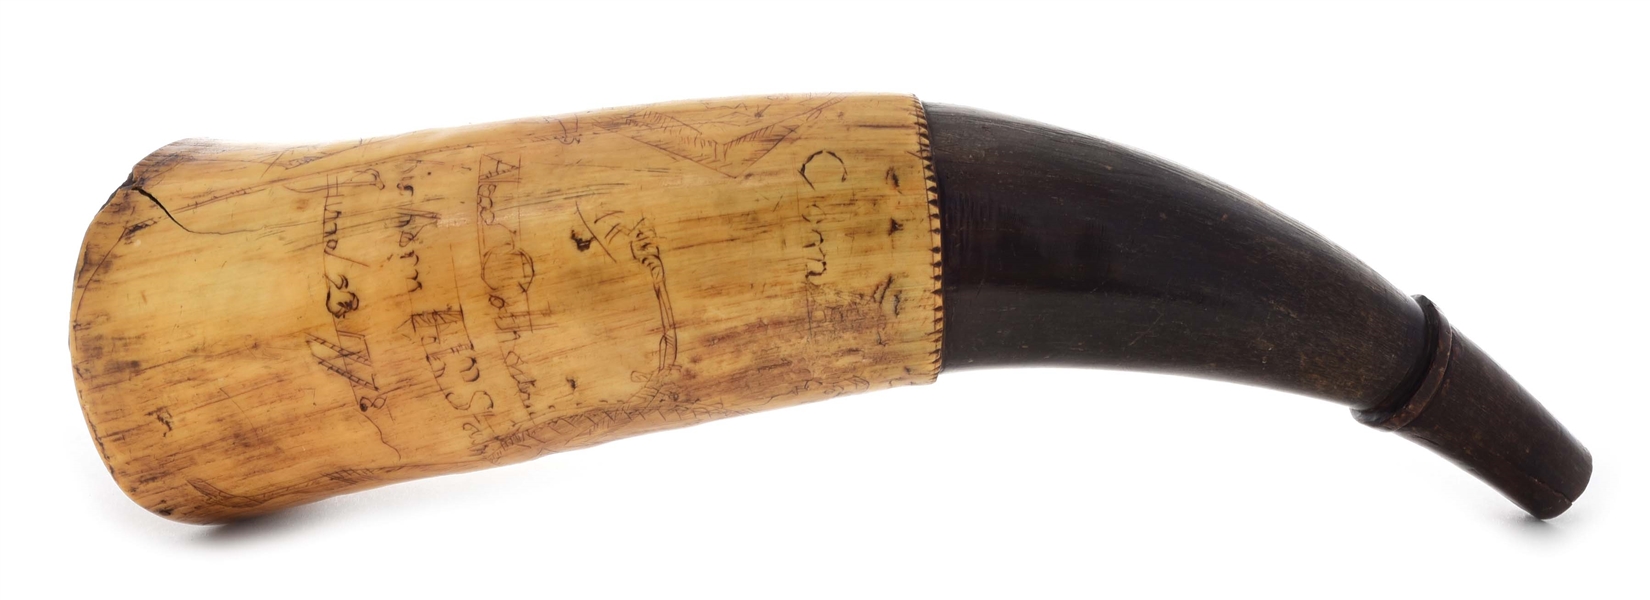 ENGRAVED AND DOCUMENTED 1778 DATED  POWDER HORN OF "ALEXANDER COLHOUN".